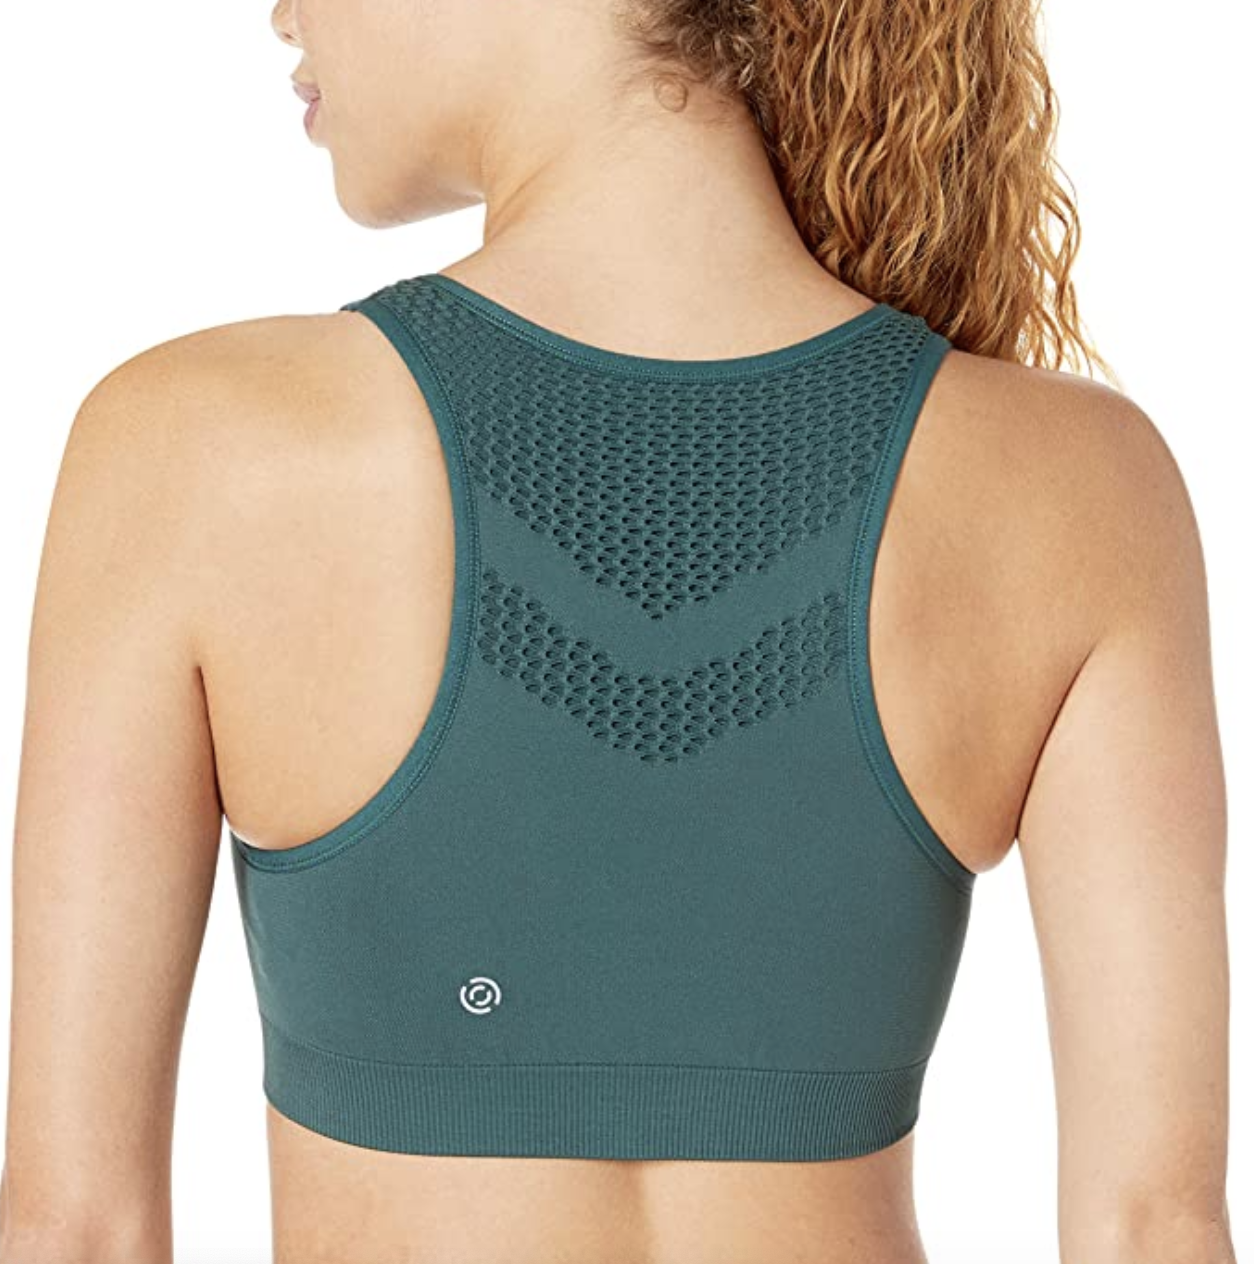 A model showing the back of a green racerback bra 